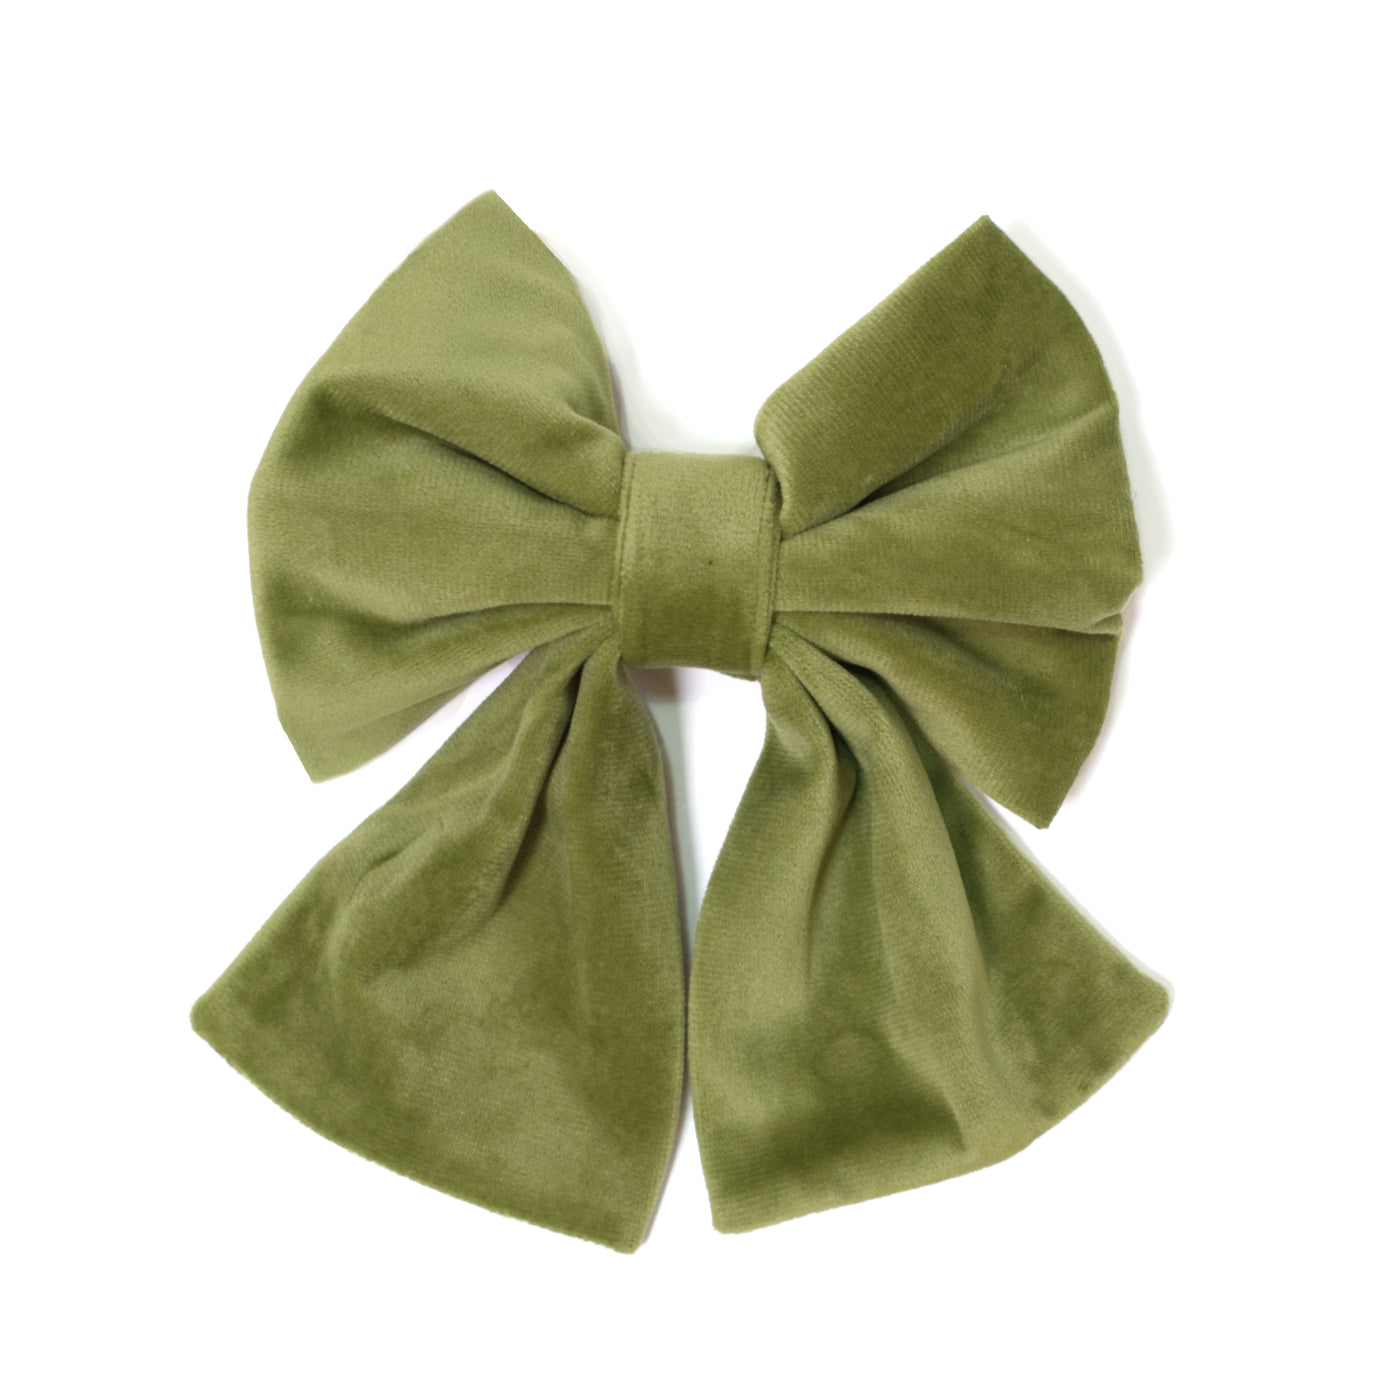 Moss green sailor dog bow for collars or harnesses